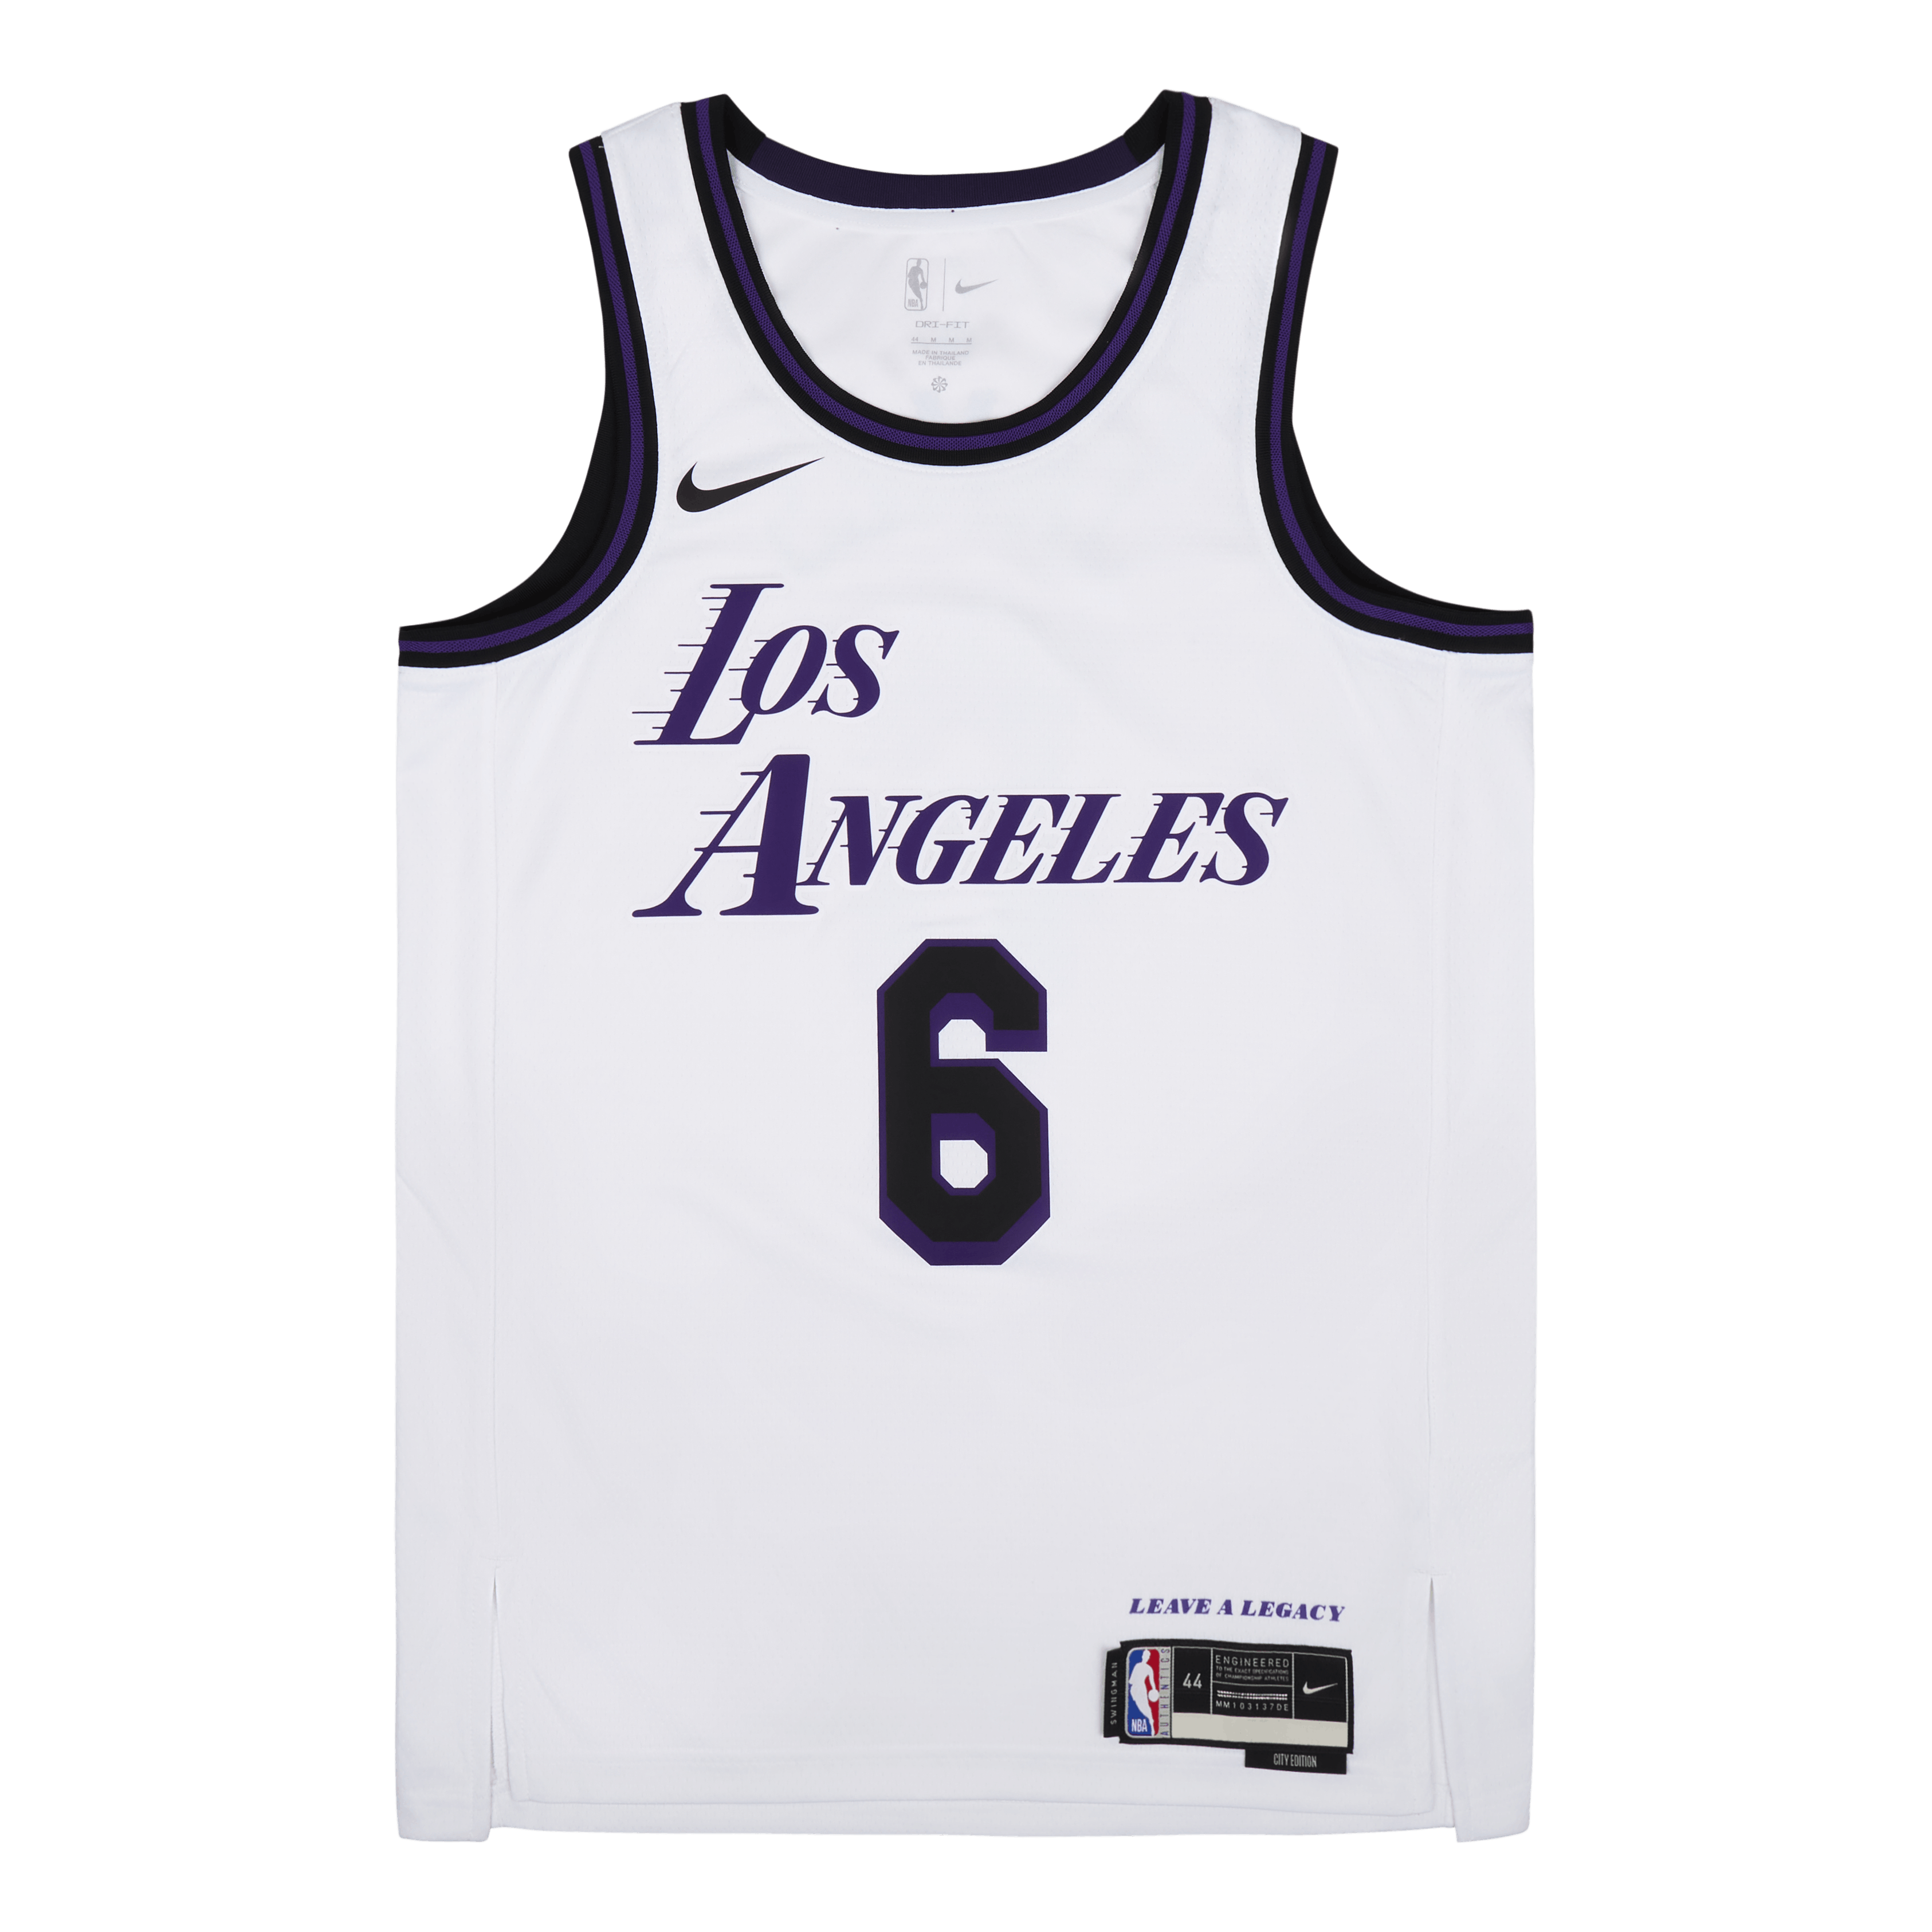 clippers city jersey font